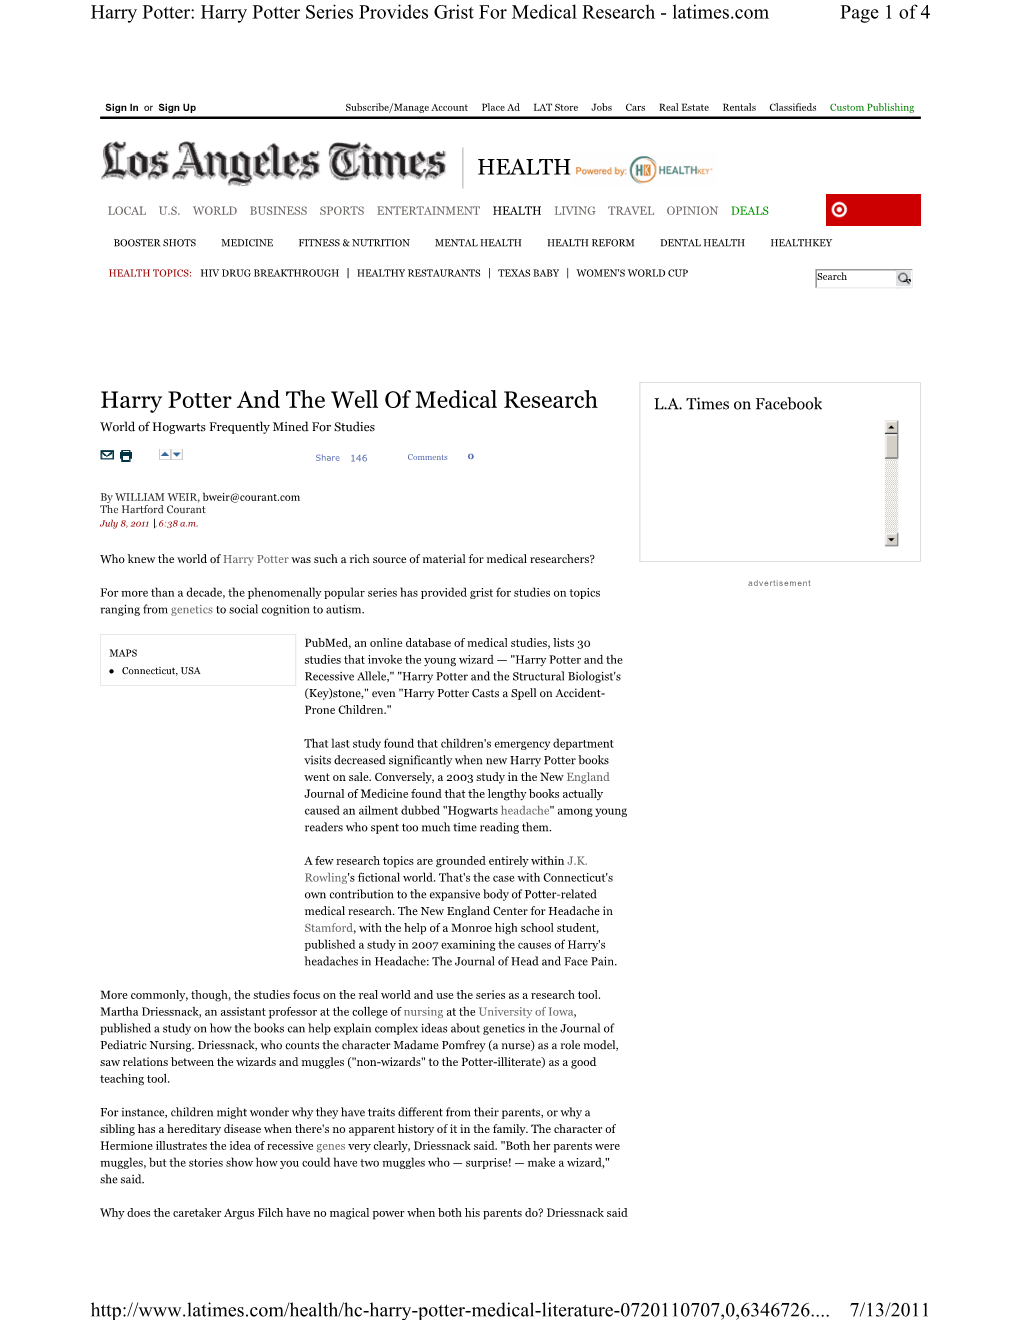 Harry Potter and the Well of Medical Research L.A